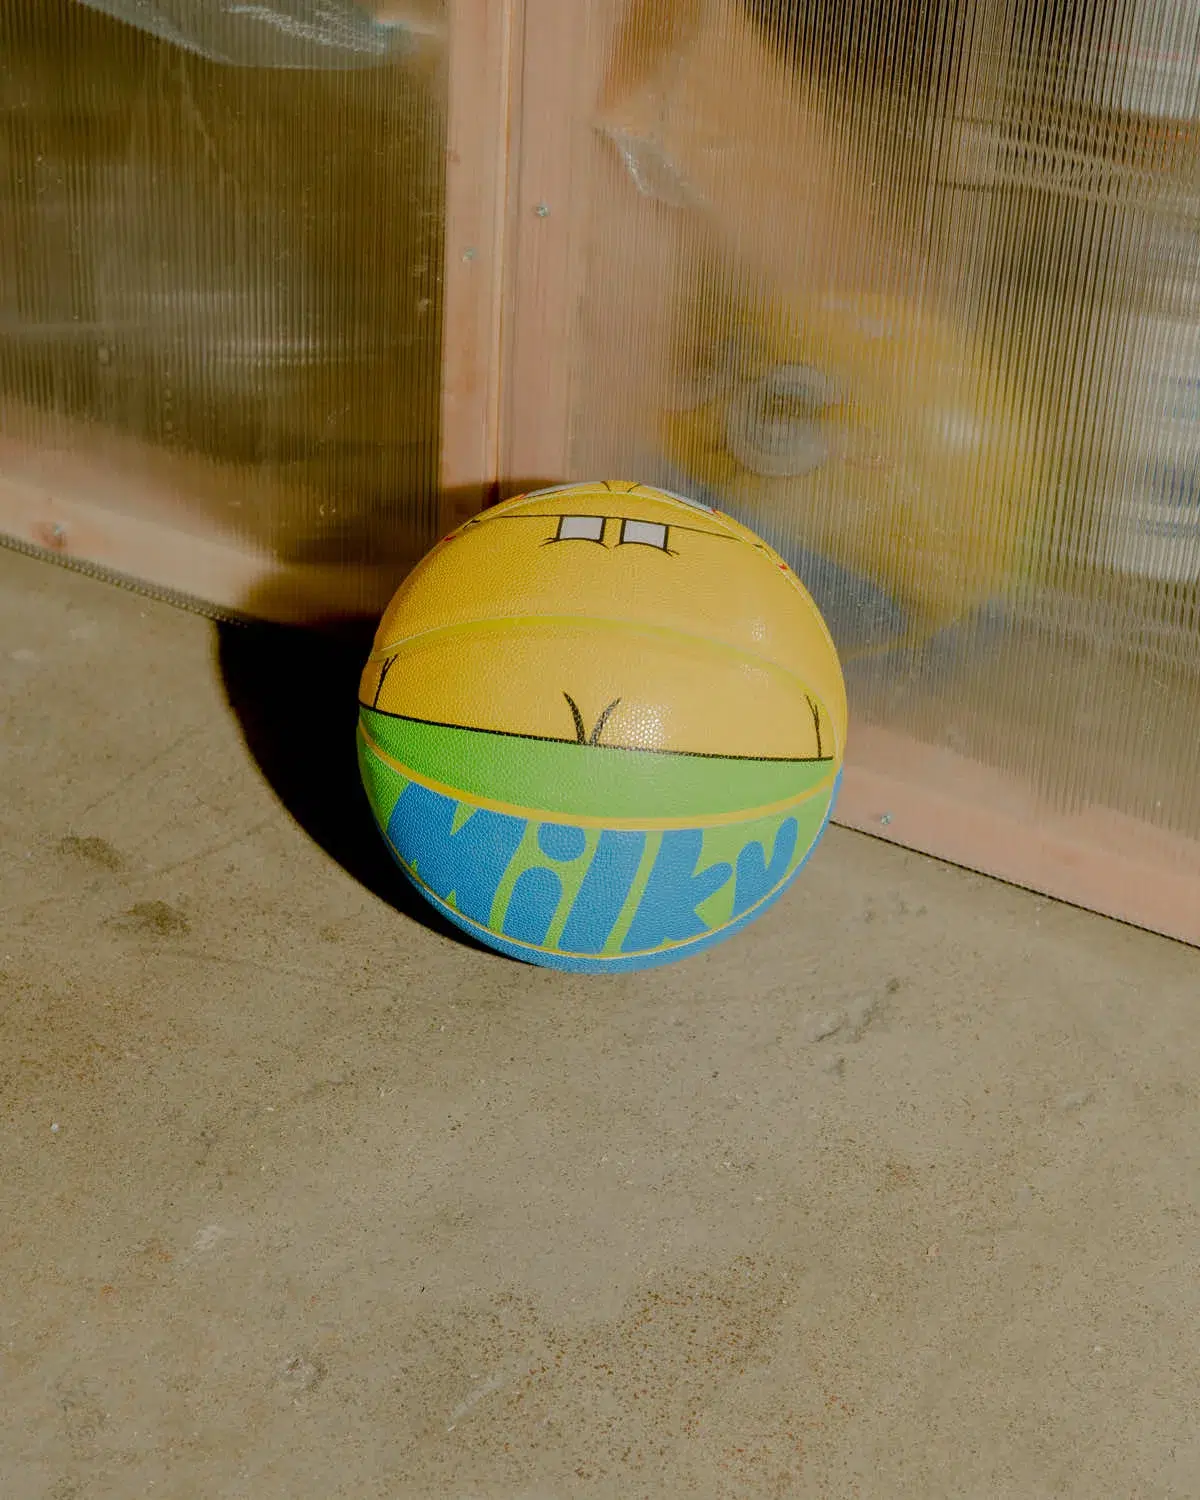 A yellow and blue LV Camo Basketball Ball laying on the ground.